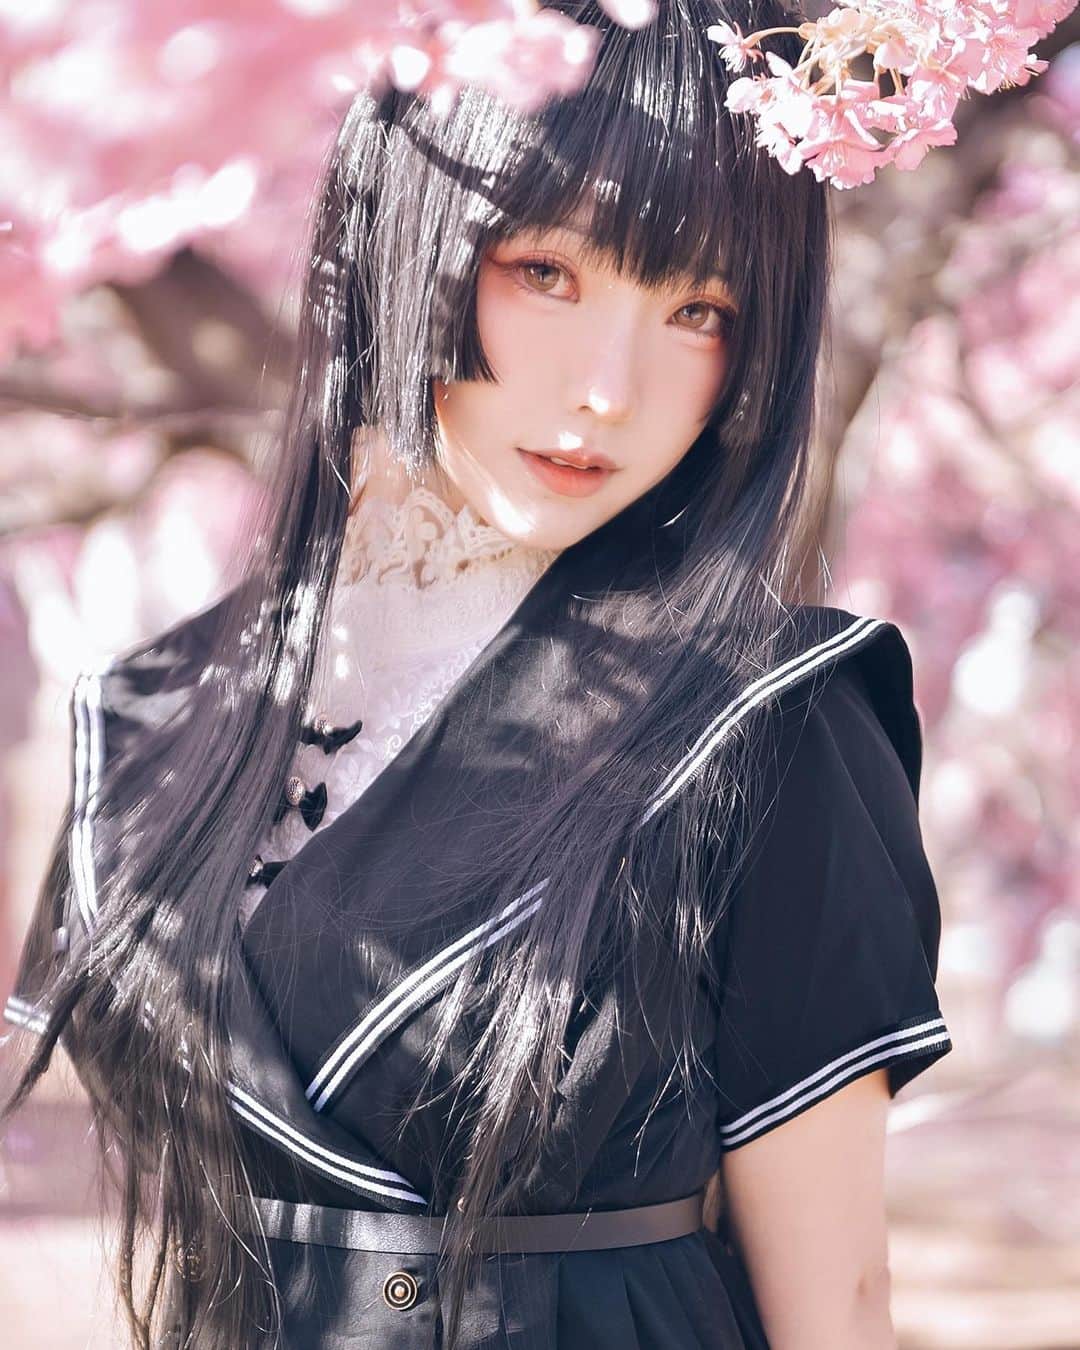 Elyのインスタグラム：「Amidst the fluttering cherry blossoms.🌸 Full  set(21p) in this month set A💌 ✧～✧～✧ 舞い散る桜の中で...🌸 今月のAセット写真です✨ ✧～✧～✧  在飛舞的櫻花中🌸  完整21枚寫真收錄在本月A組✨  #ely #elycosplay #portrait #sakura #セーラー服」